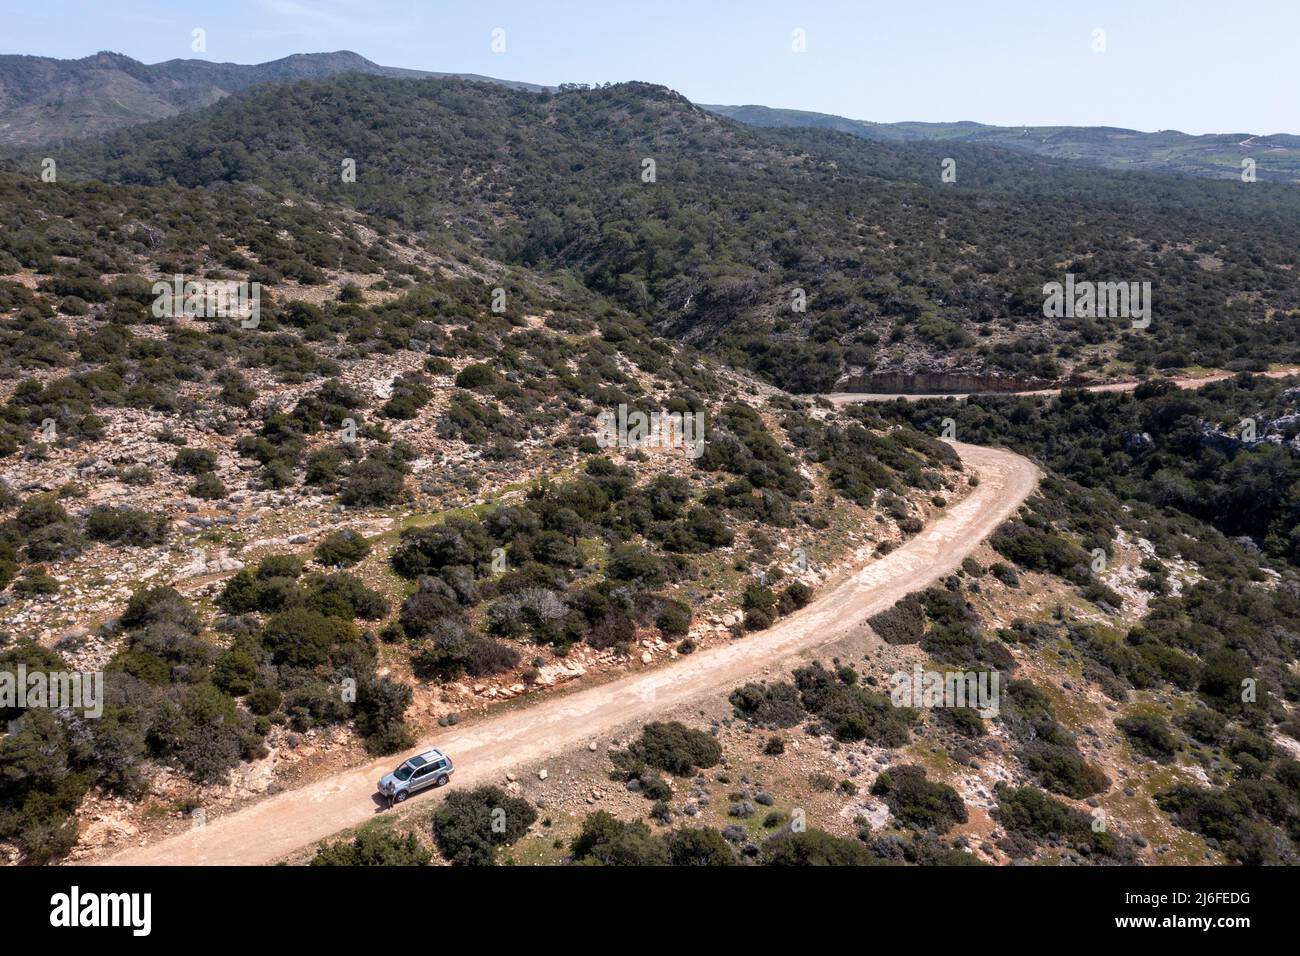 Aerial view of a dirt road on the Akamas Peninsula, Western Cyprus. Stock Photo